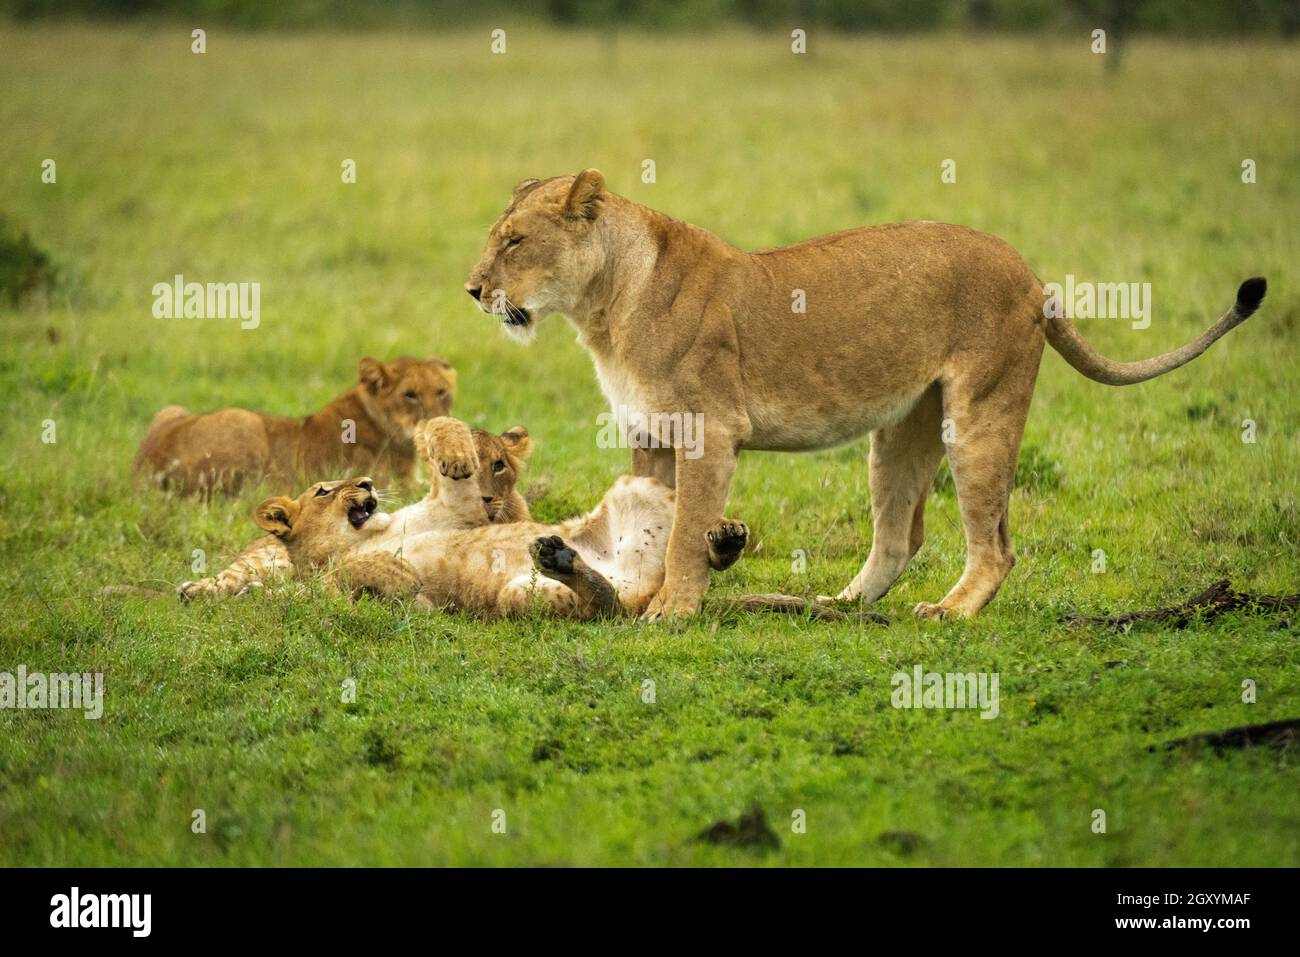 Lion cub lies on back near mother Stock Photo